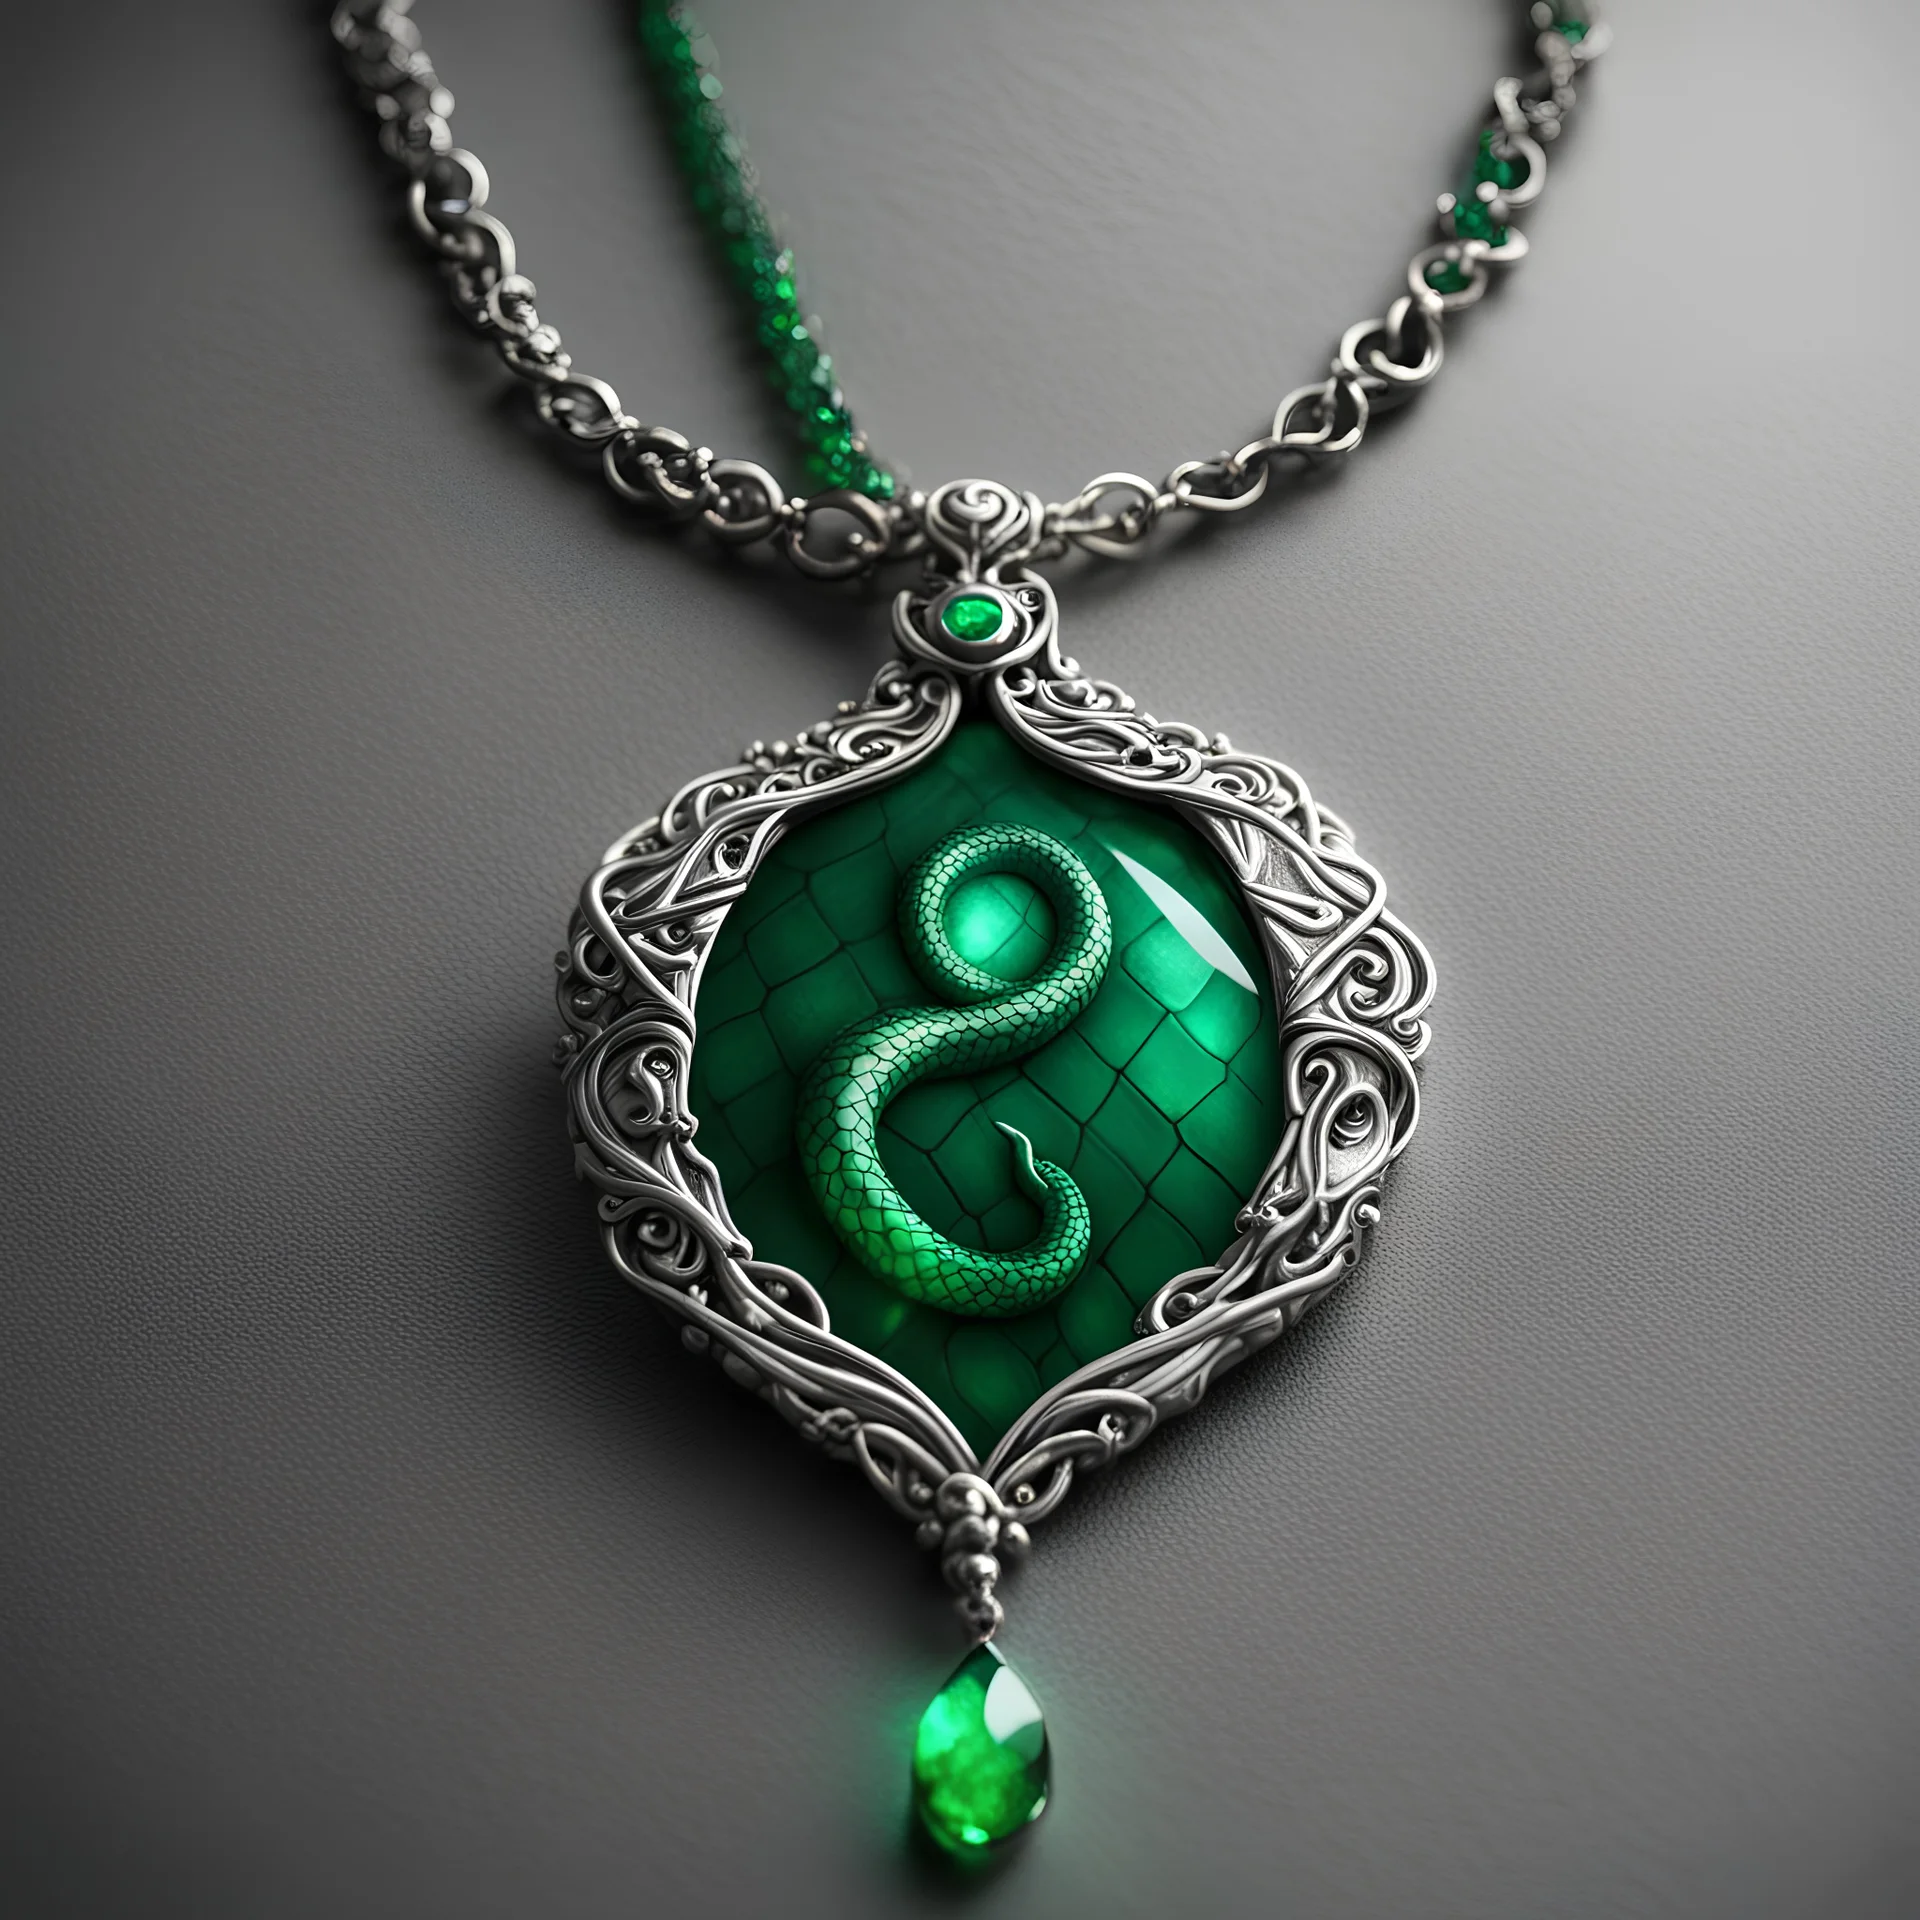 necklace, magic, superpower, slytherin, jewel, luxury, wizard, green, emerald, silver, snake, scales, evil, glowing, emissive